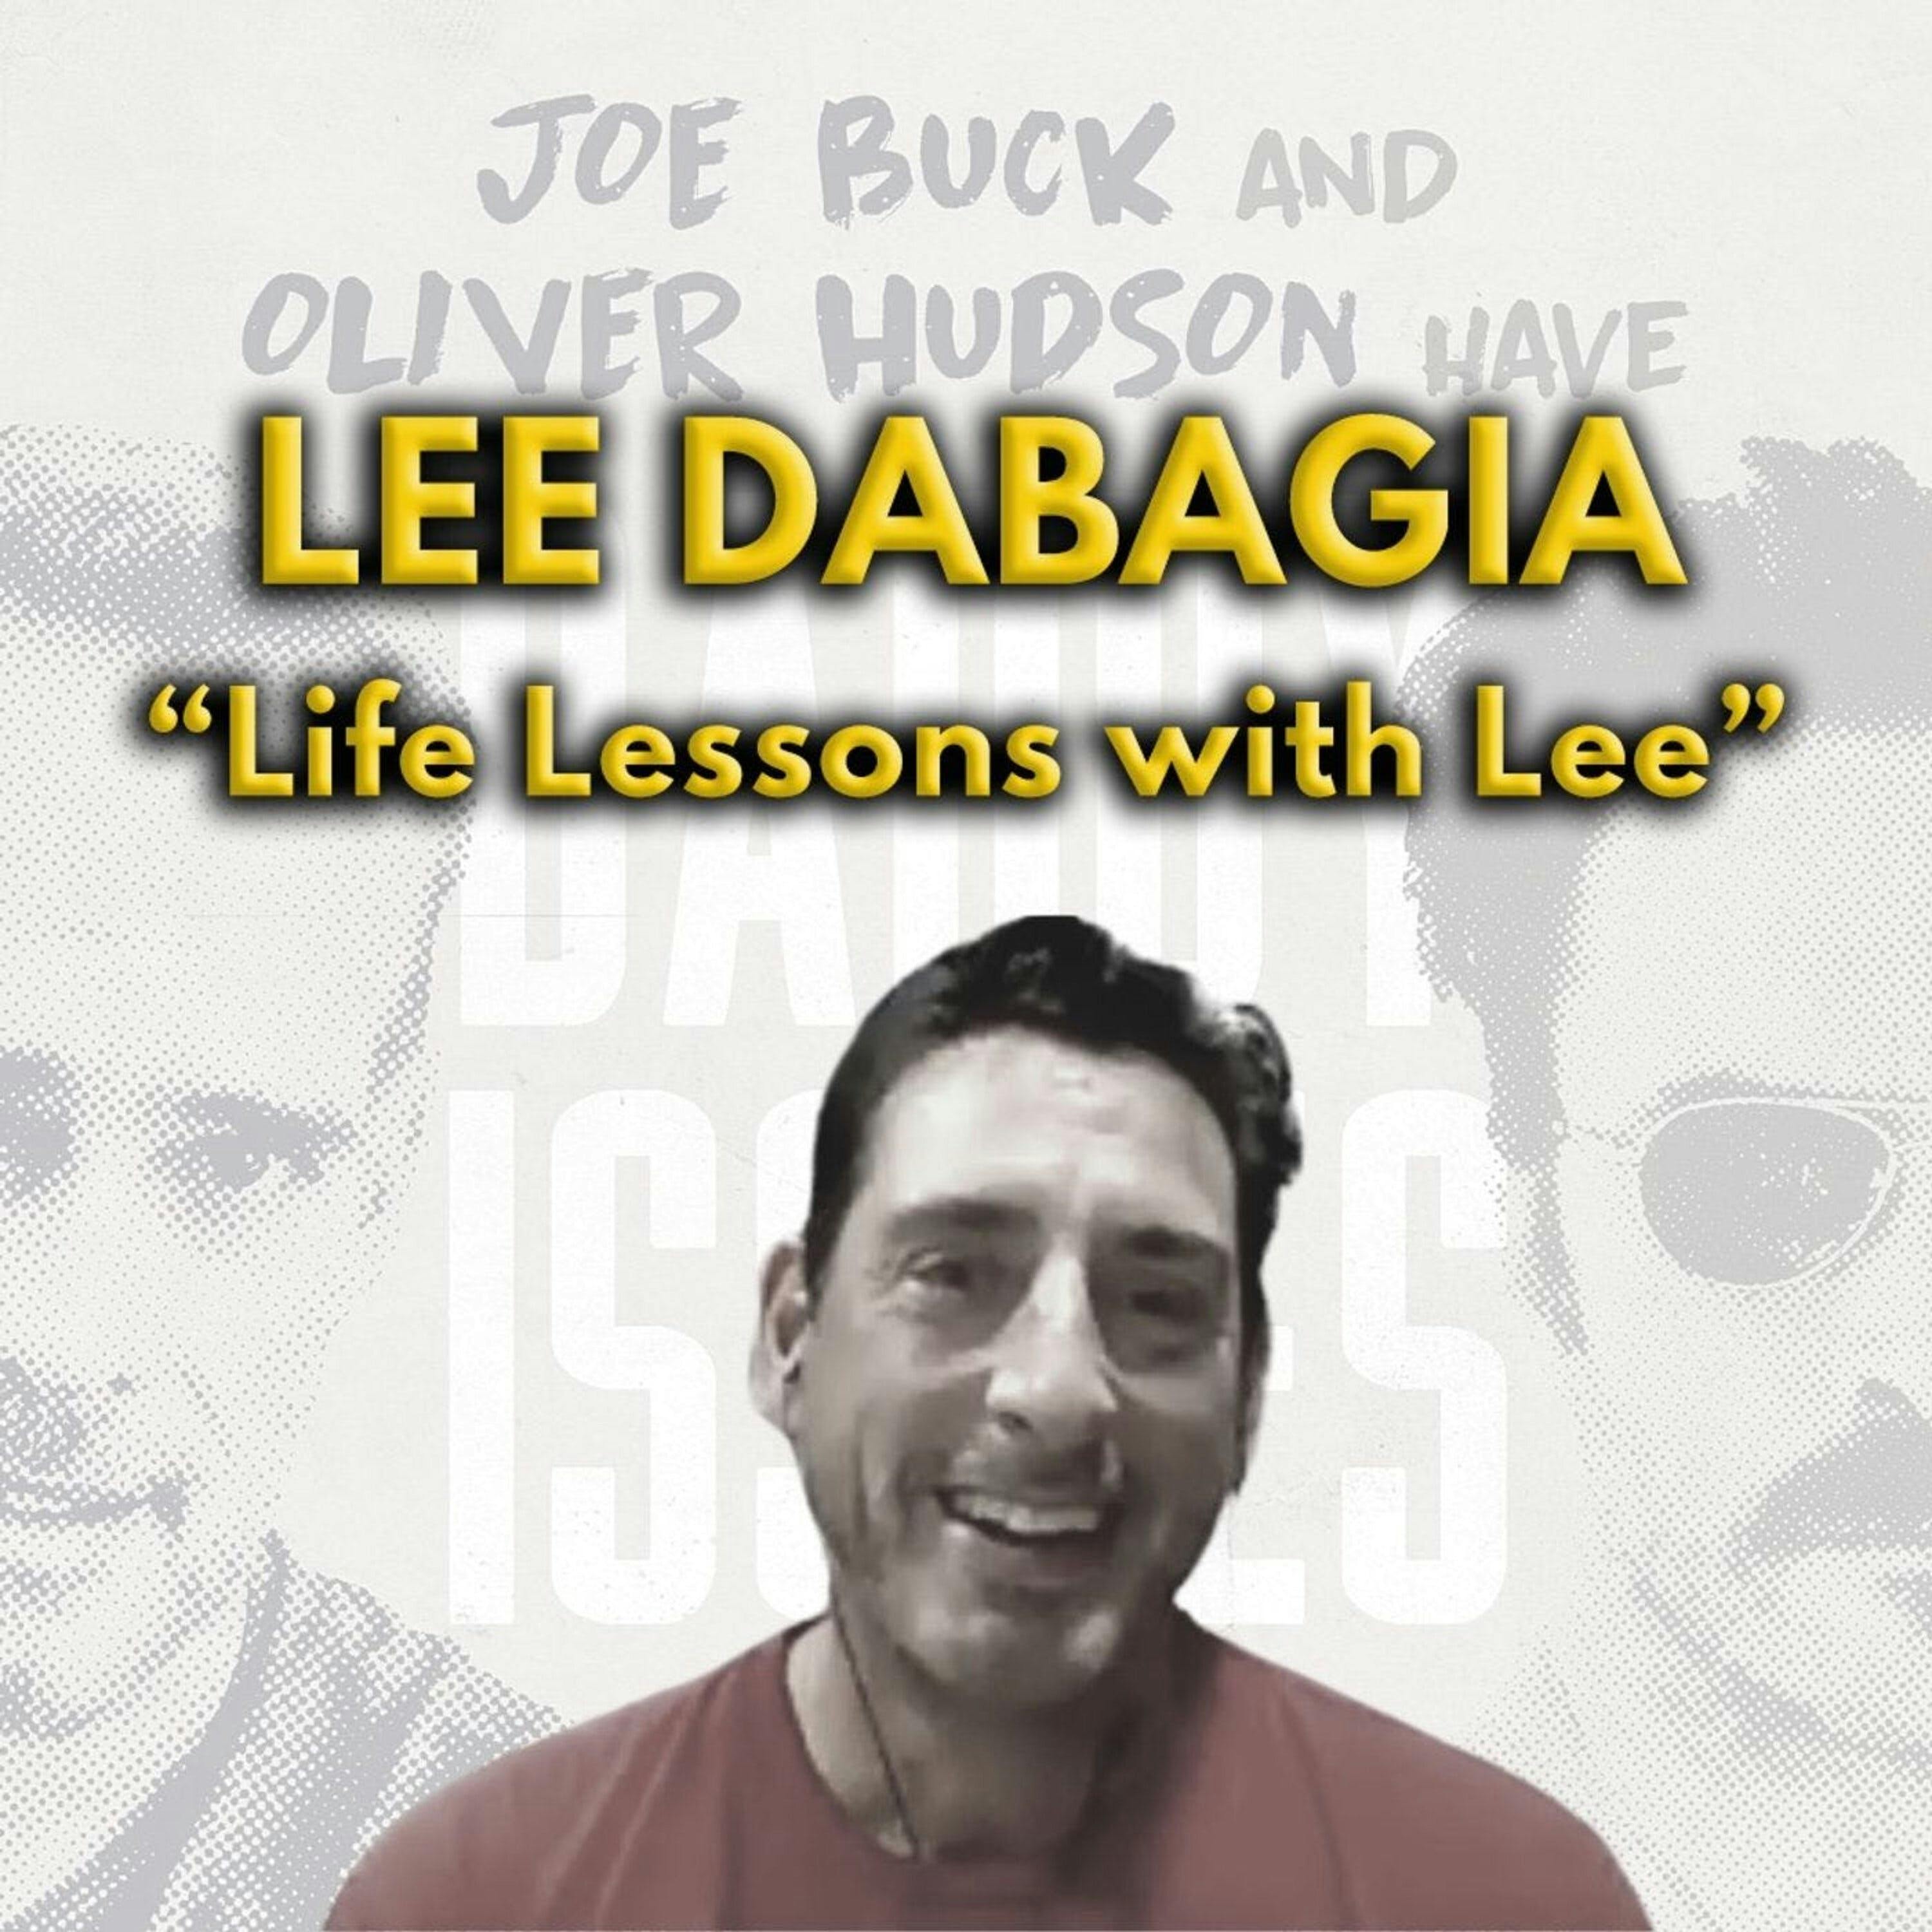 Lee Dabagia: Life Lessons with Lee